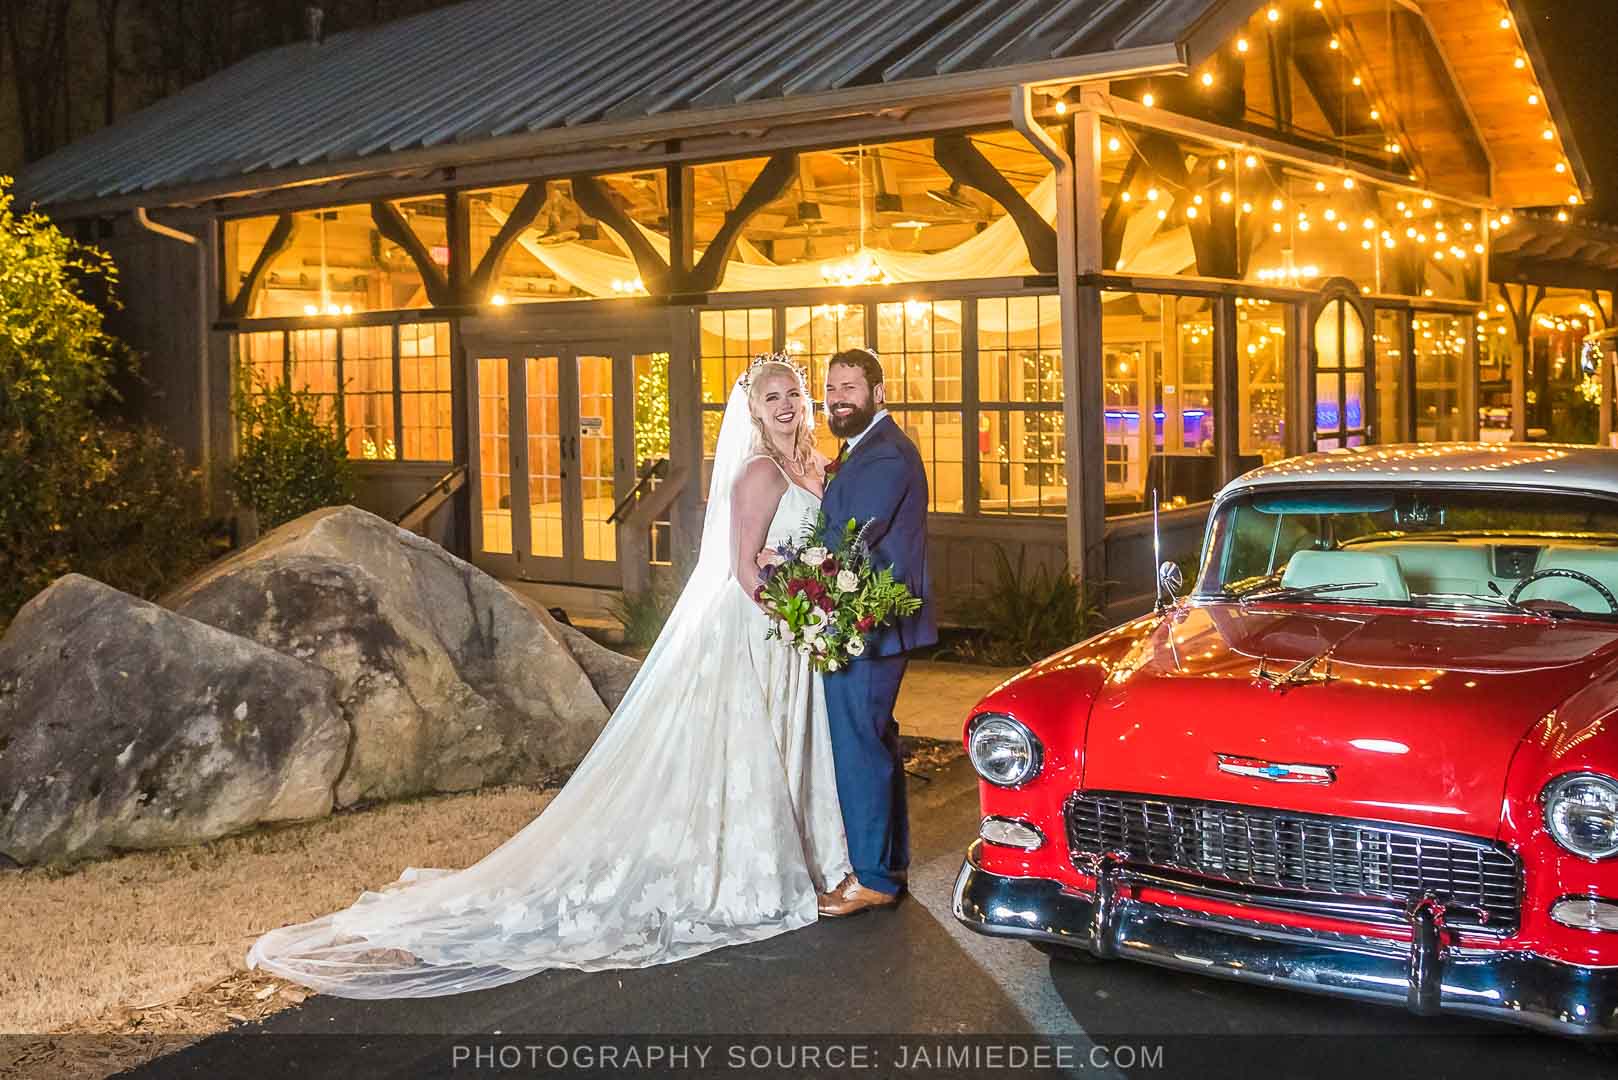 Rocky's Lake Estate Wedding Venue - bride and groom portrait - night time couples portraits in front of lit up venue with classic car